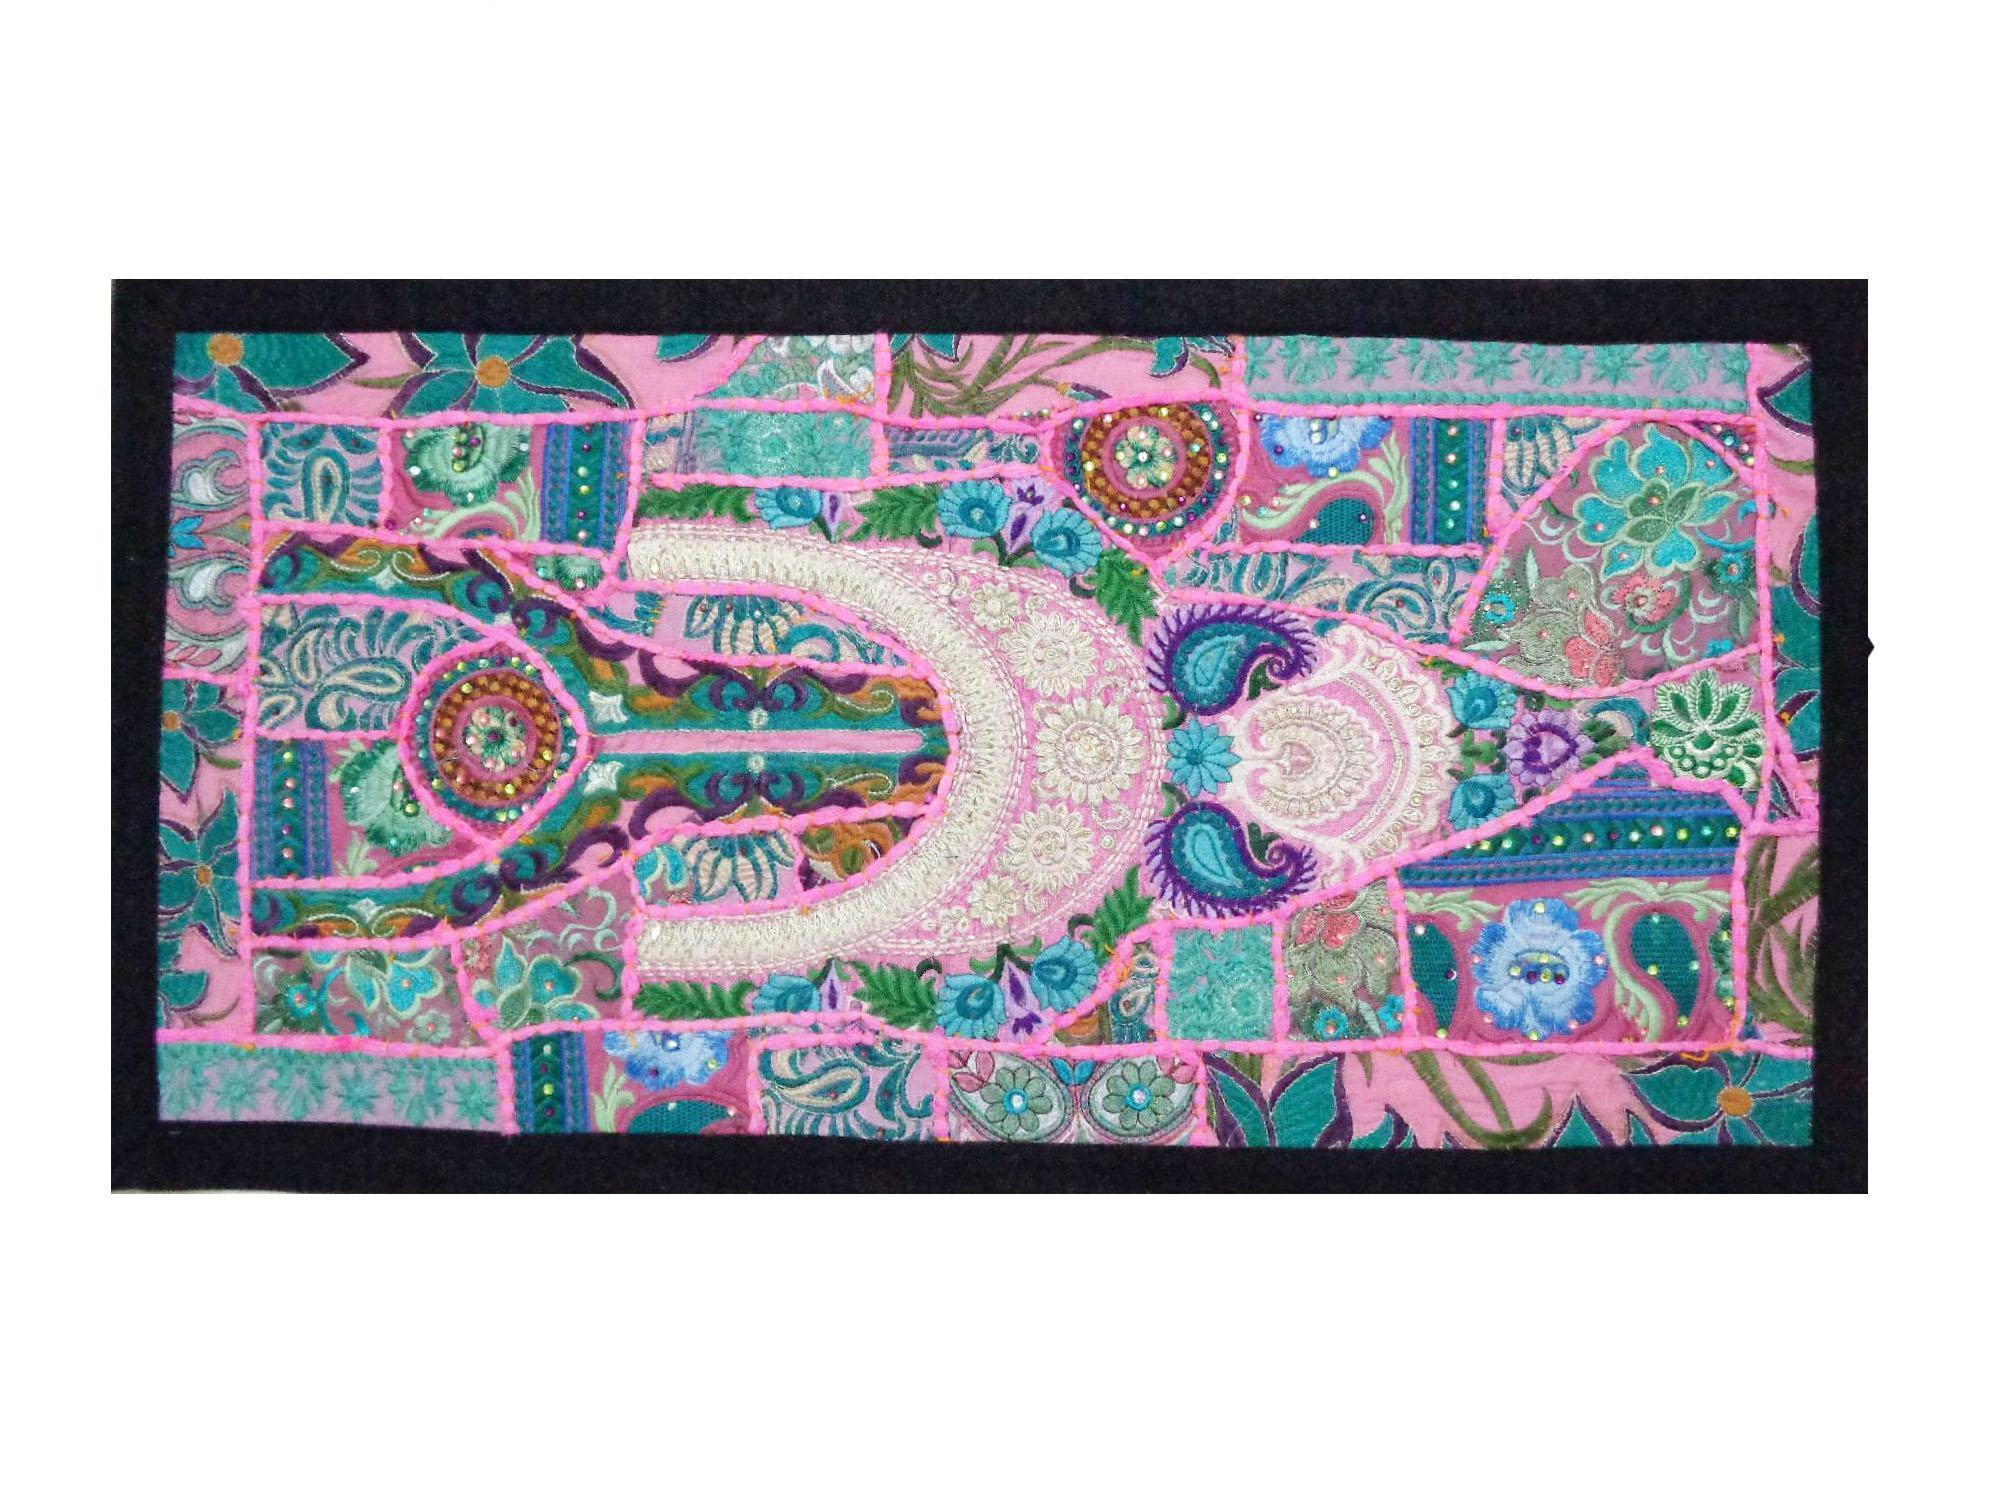 INDIAN TAPESTRY WALL HANGING TABLE RUNNER PATCHWORK ETHINIC SARI WORK HANDMADE TI13